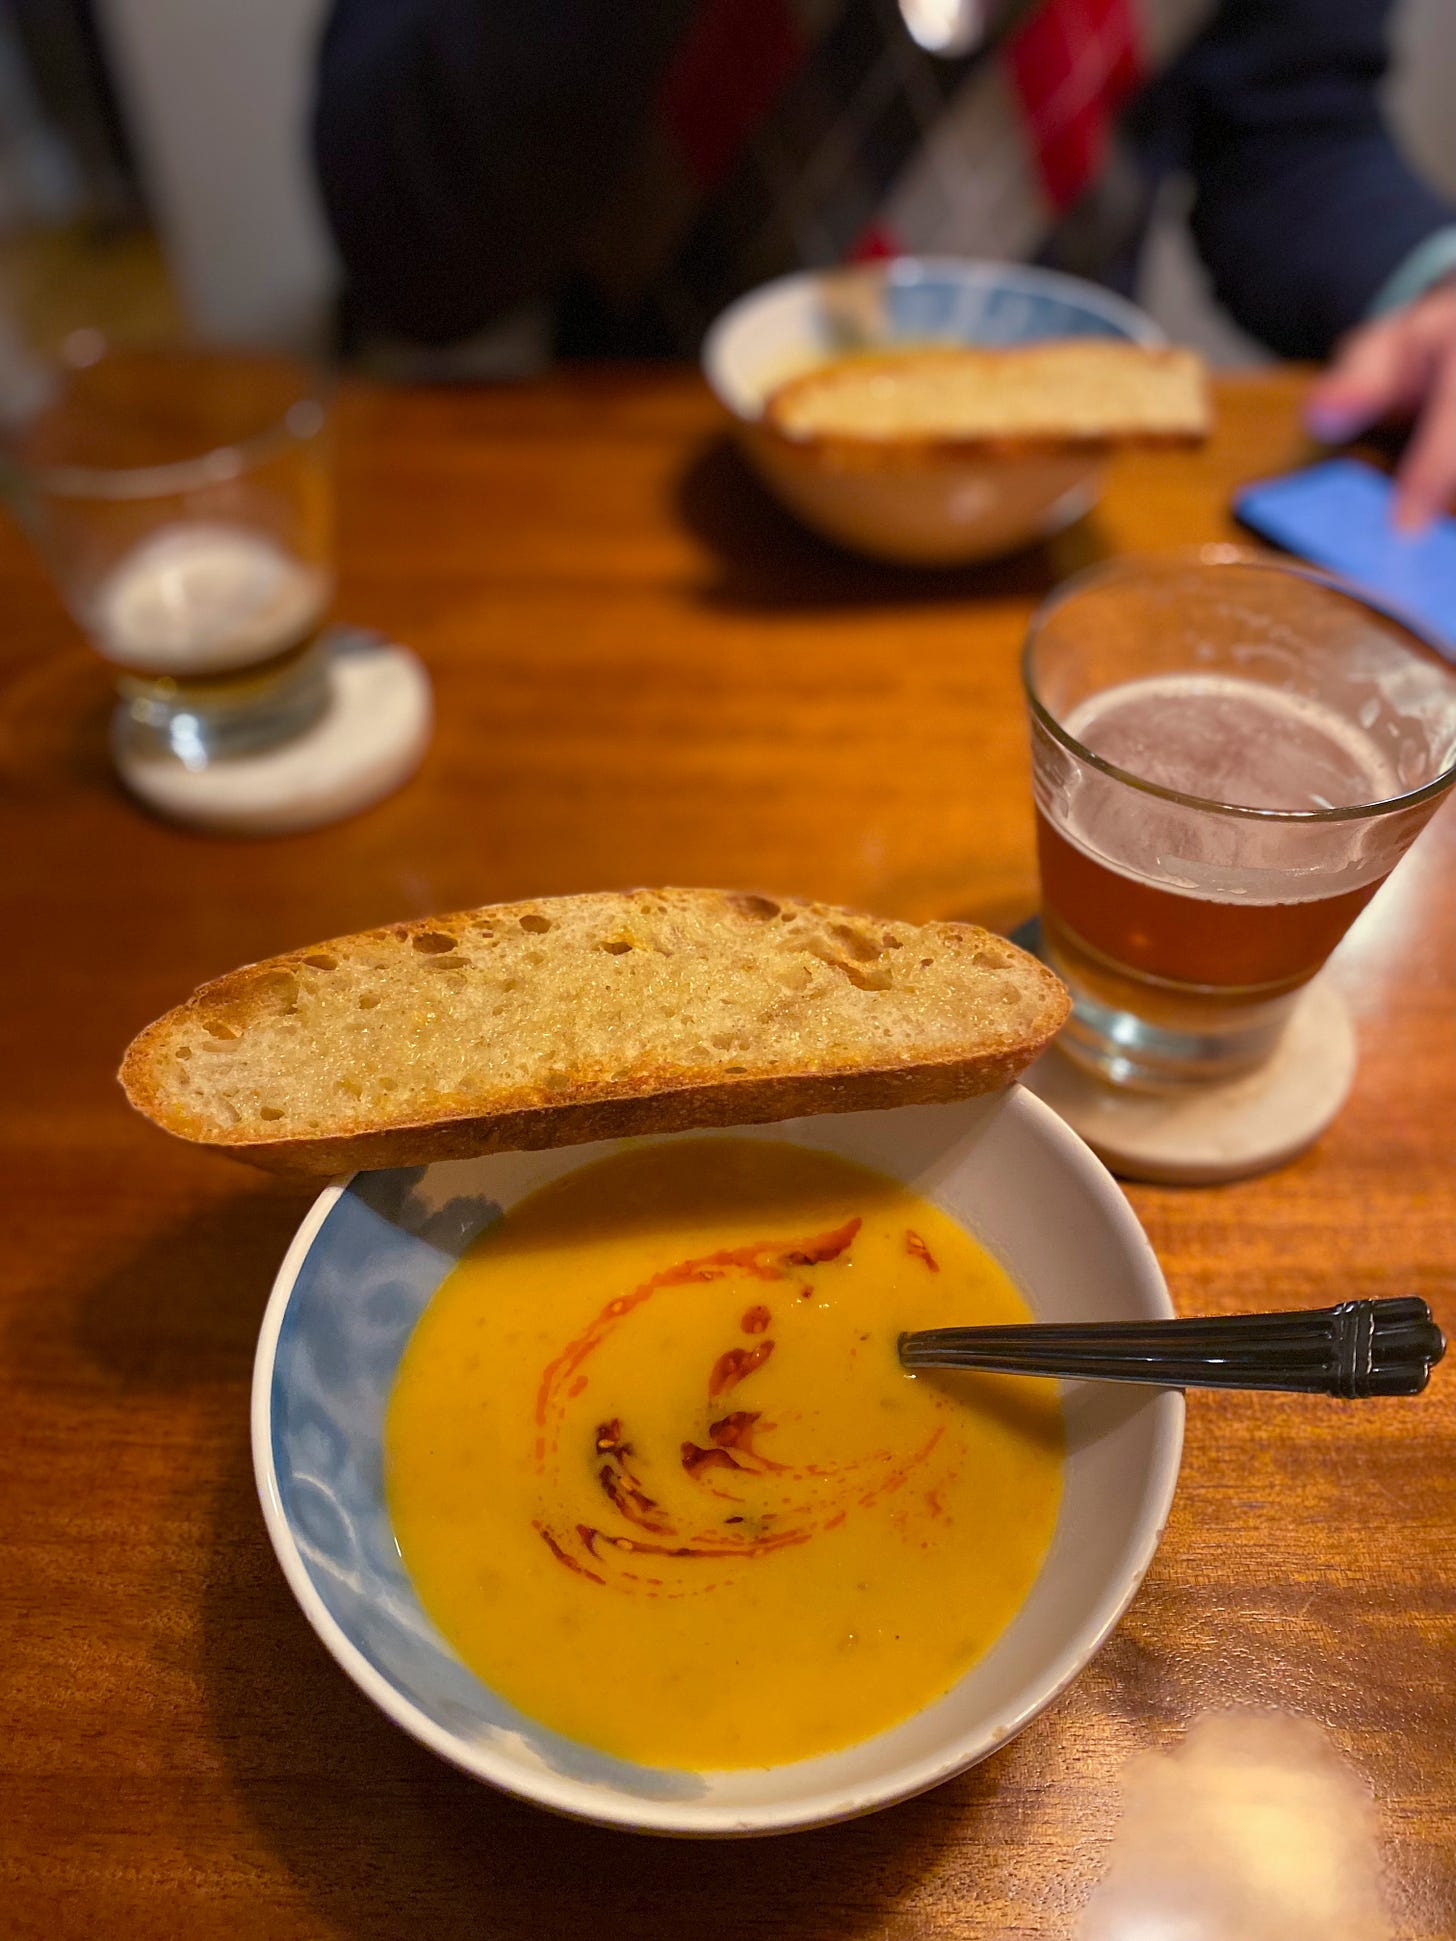 A bowl of the blended carrot soup described above, with a swirl of chili oil on top and a slice of bread at the edge of the bowl. A glass of beer is on the coaster to the right, and Jeff is across the table with his own bowl.